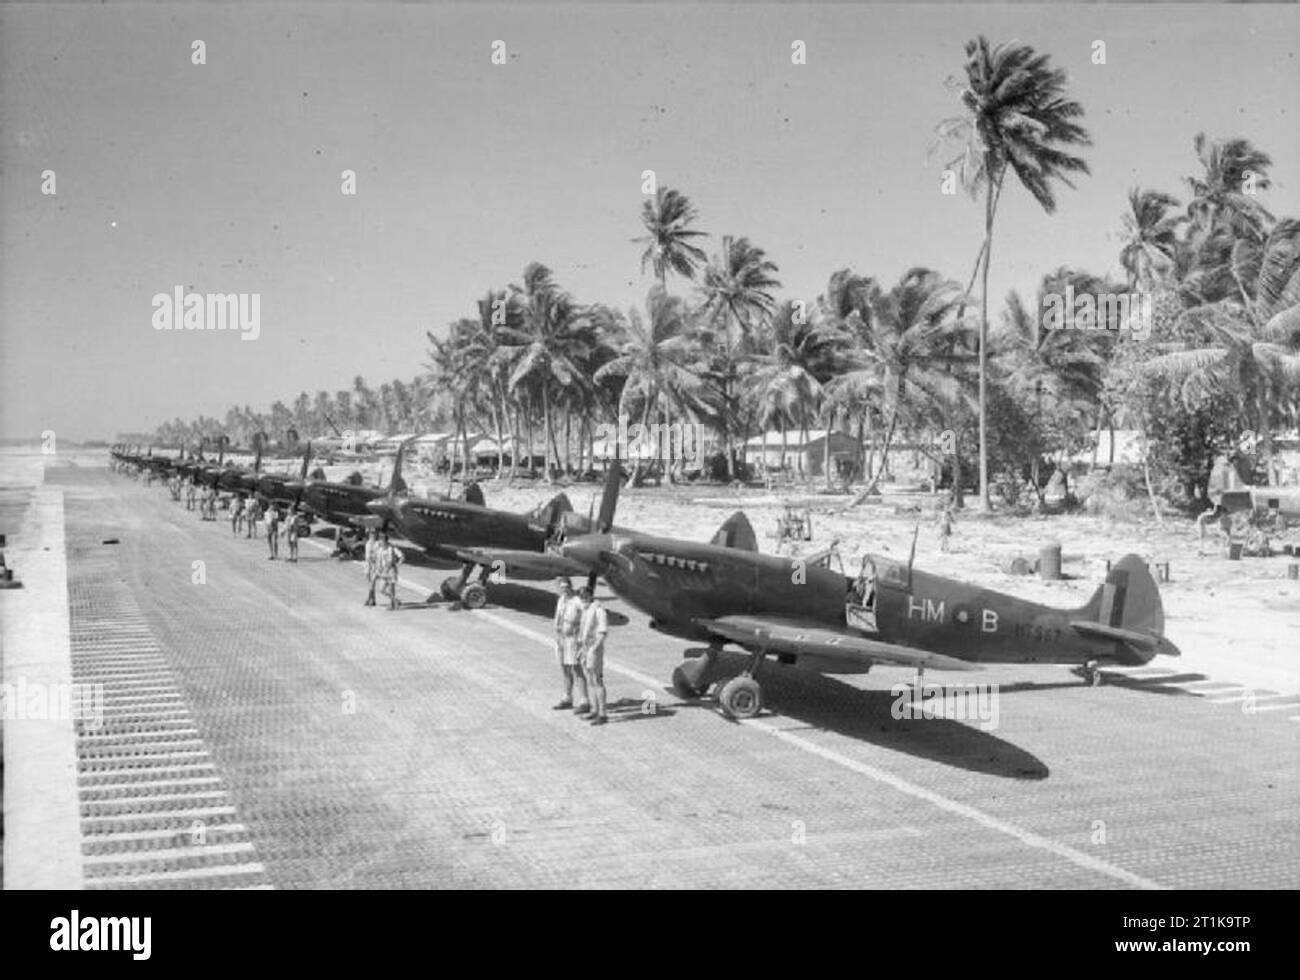 Royal Air Force Operations in the Far East, 1941-1945 Spitfire Mk VIIIs and personnel of No. 136 Squadron RAF lined up on a recently-laid PSP airstrip on Brown's West Island, Cocos Islands, in the Indian Ocean. Stock Photo